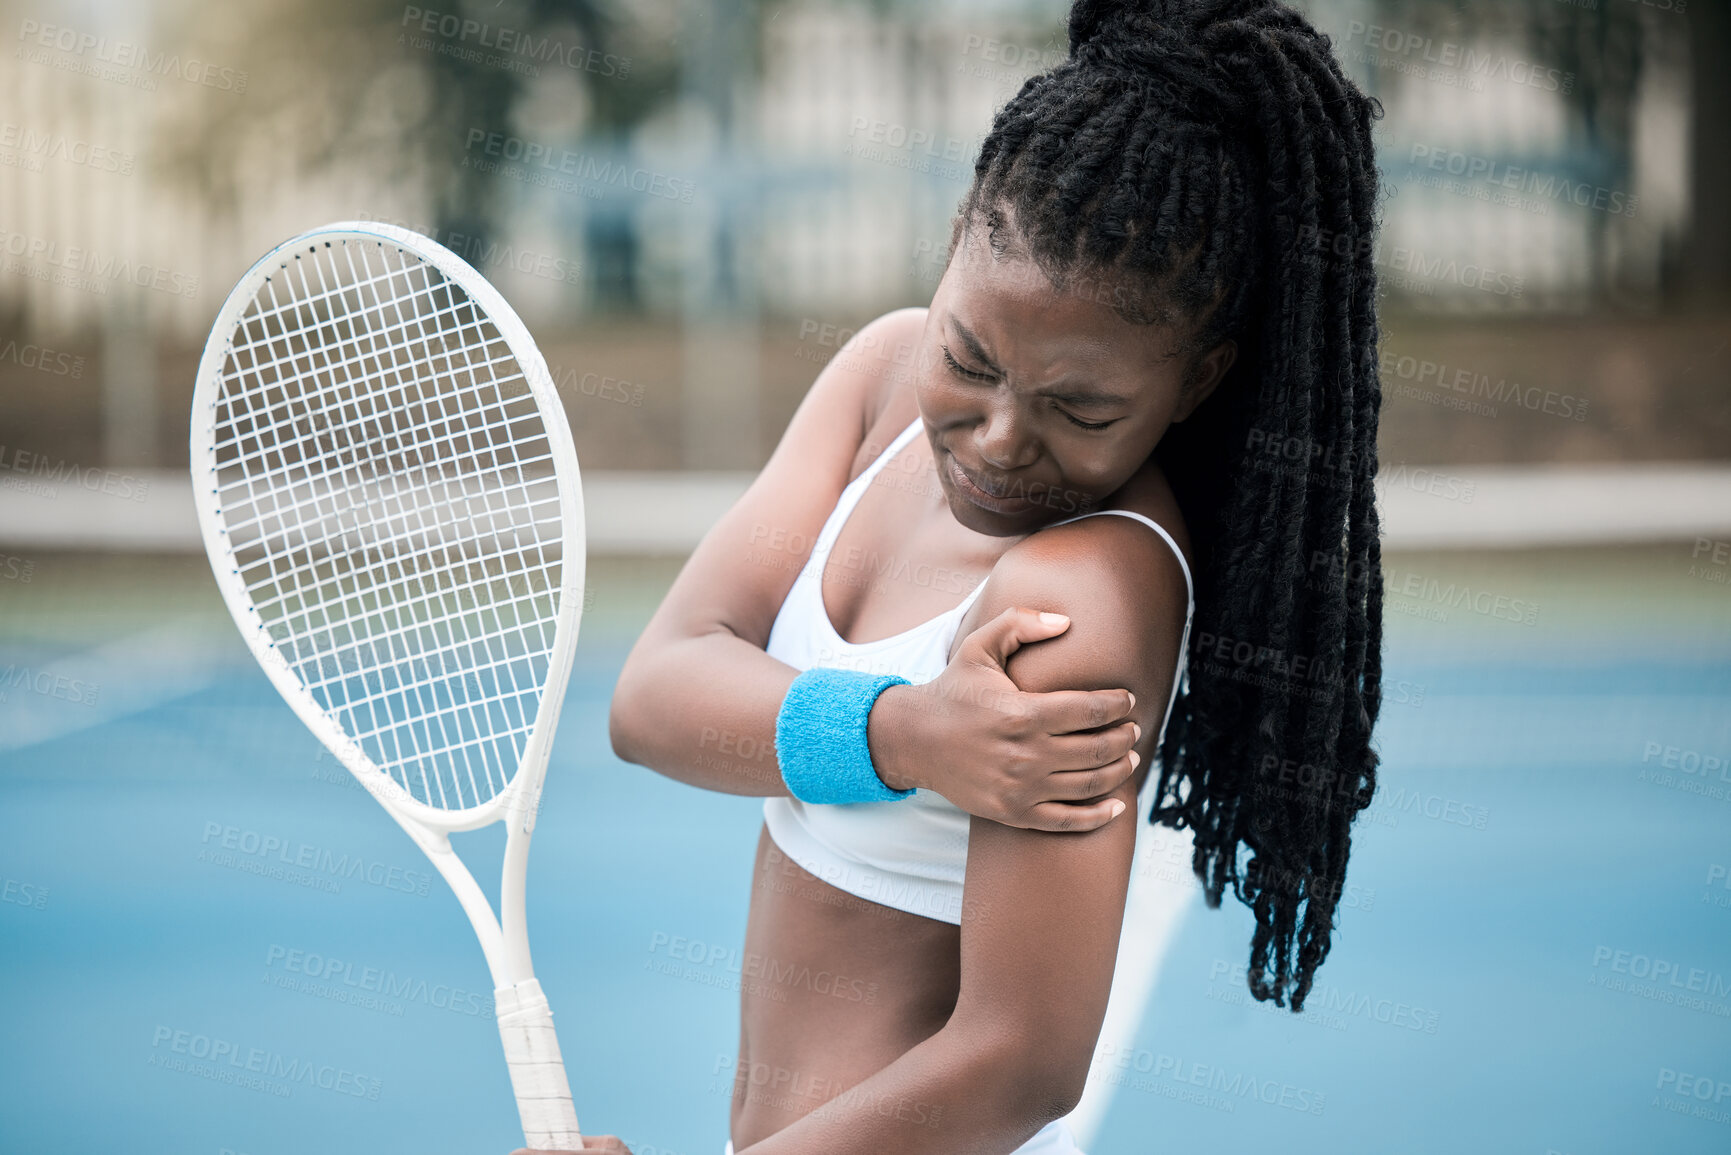 Buy stock photo Muscle injury, tennis game and black woman with emergency health problem during competition, medical accident during sports and fitness training on court. African athlete with arm pain during cardio